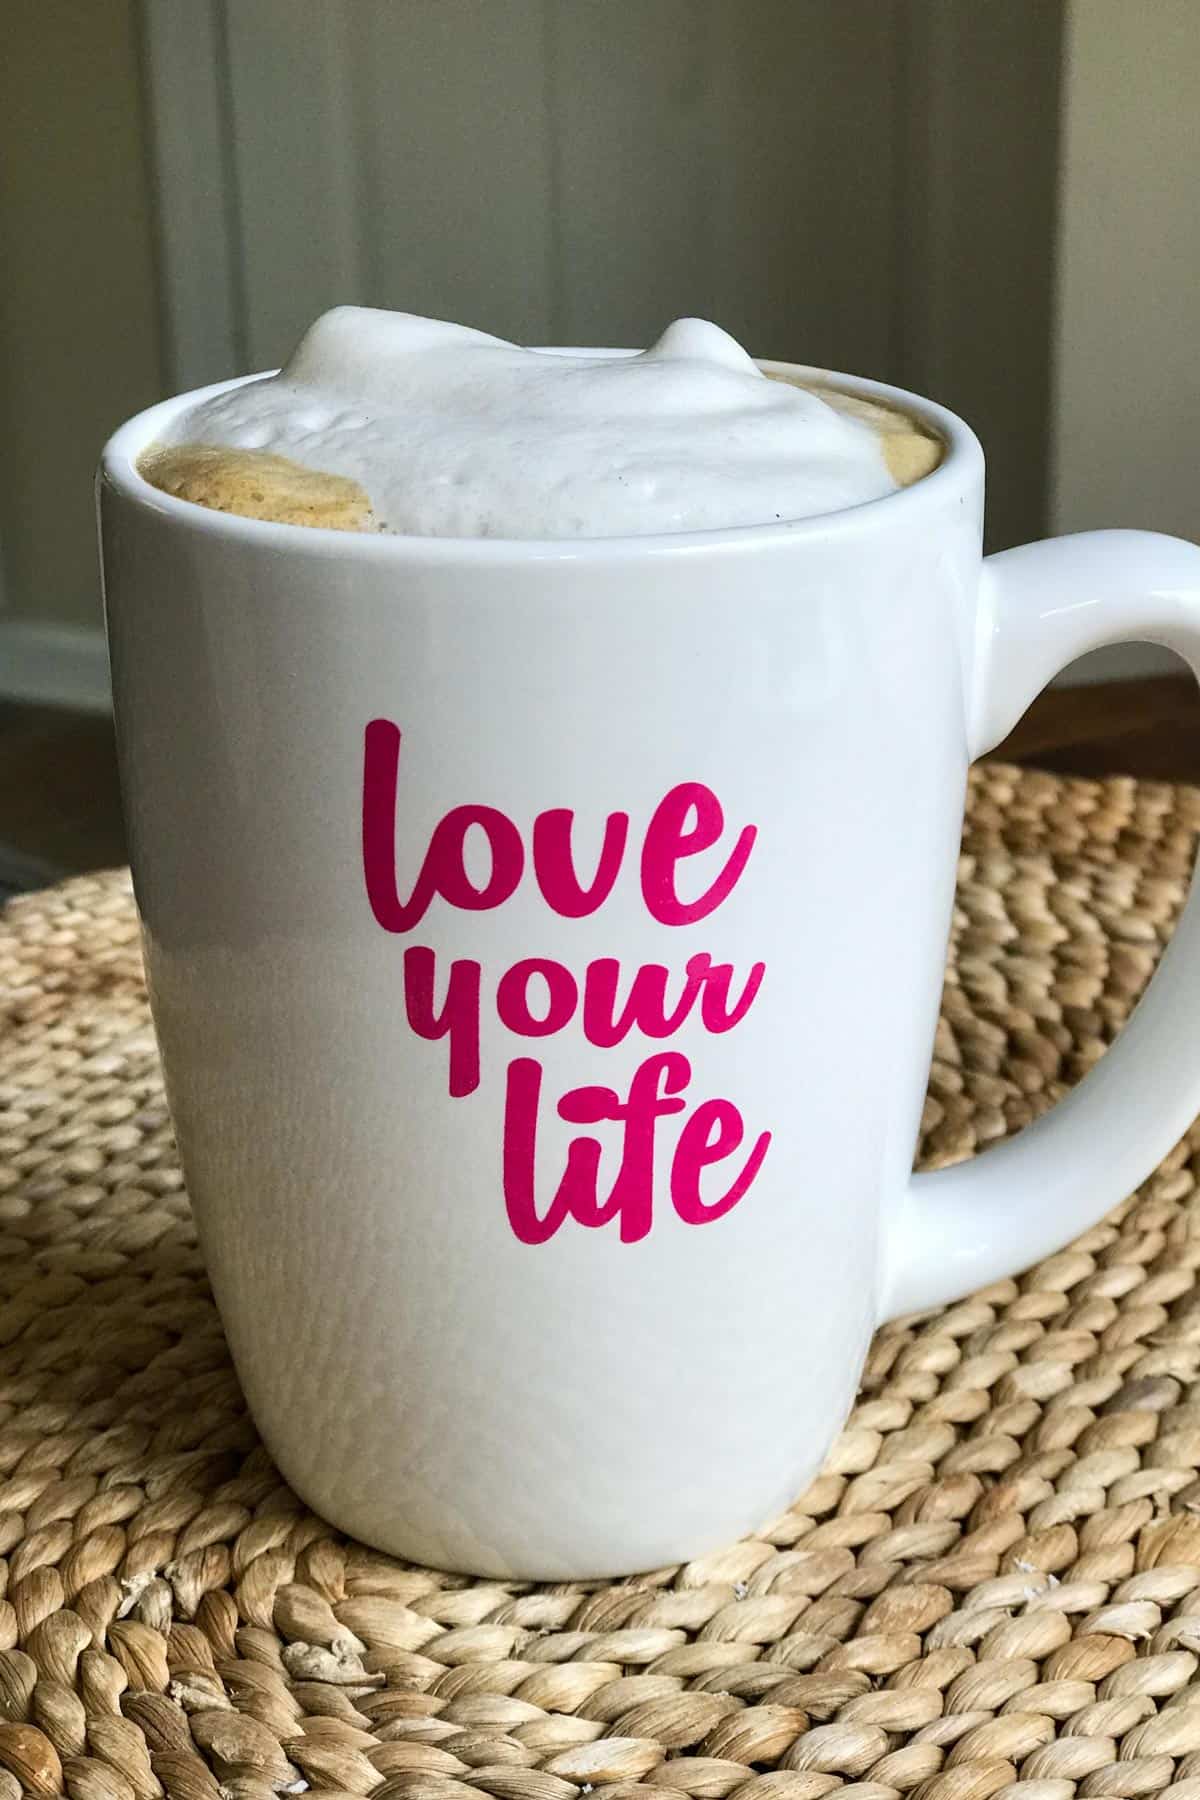 Dairy-free cappuccino in mug that says "love your life"